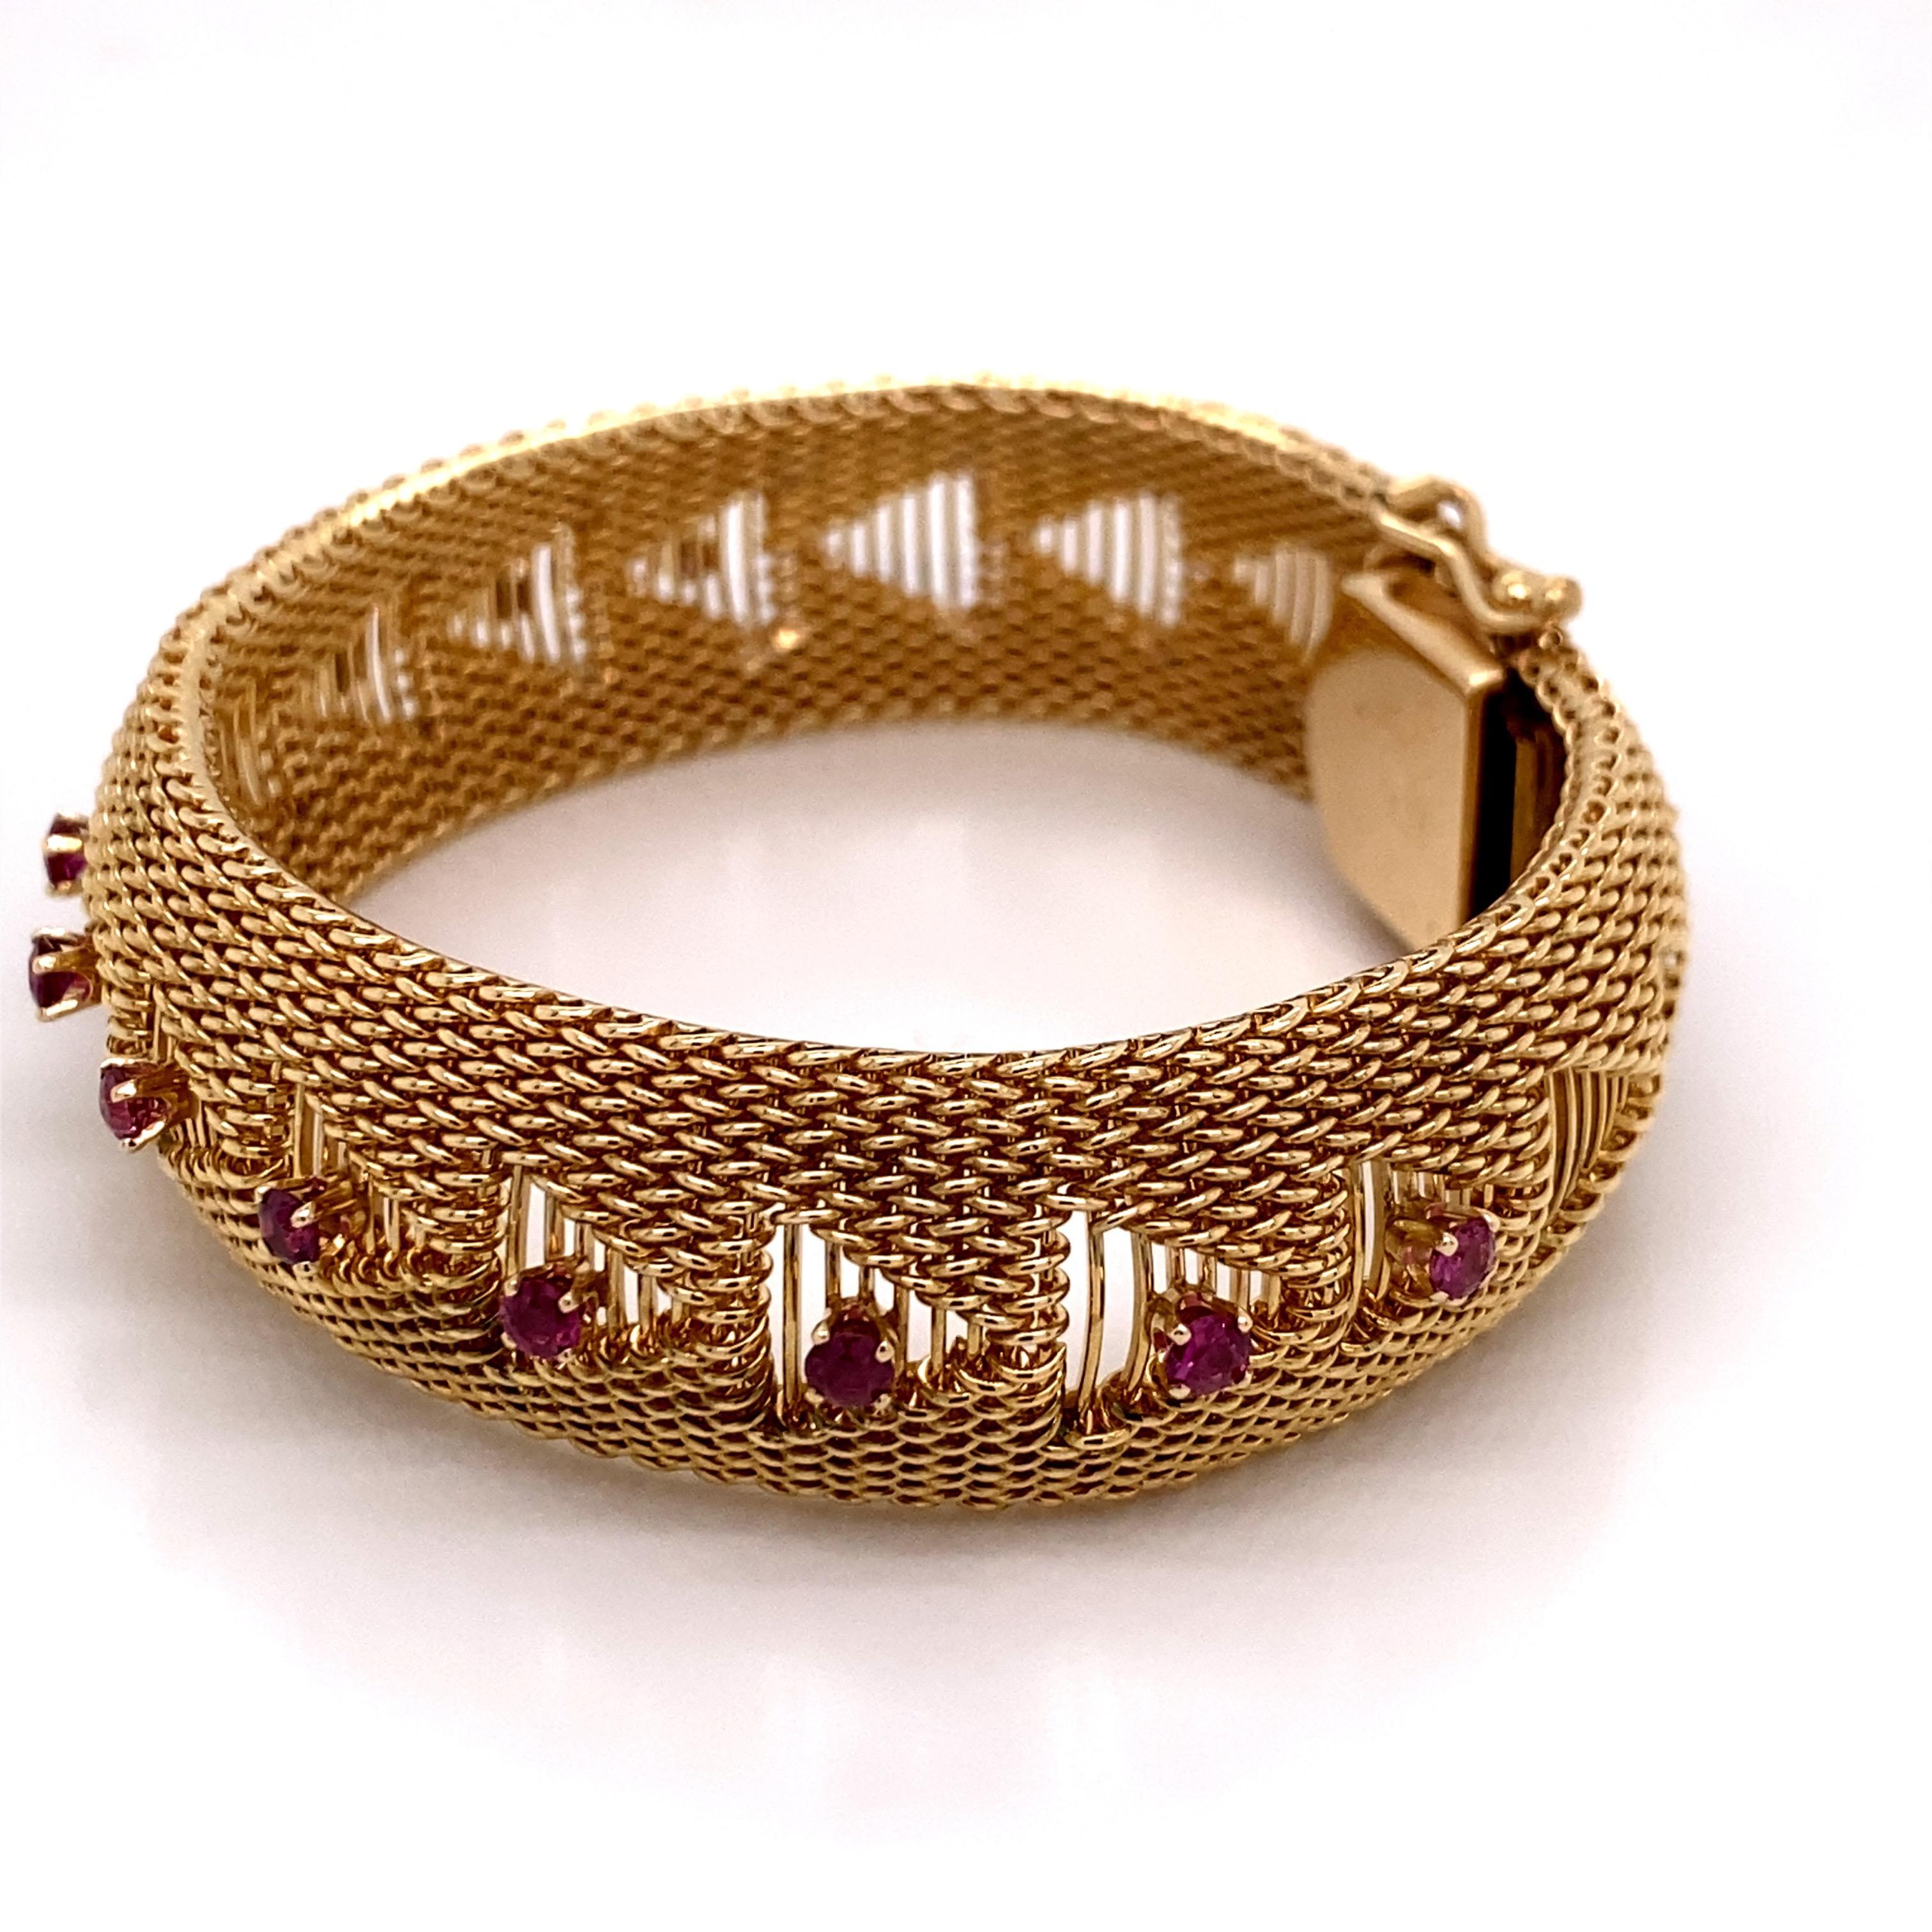 Vintage 1960s 14 Karat Yellow Gold Mesh Bracelet with Rubies For Sale 1